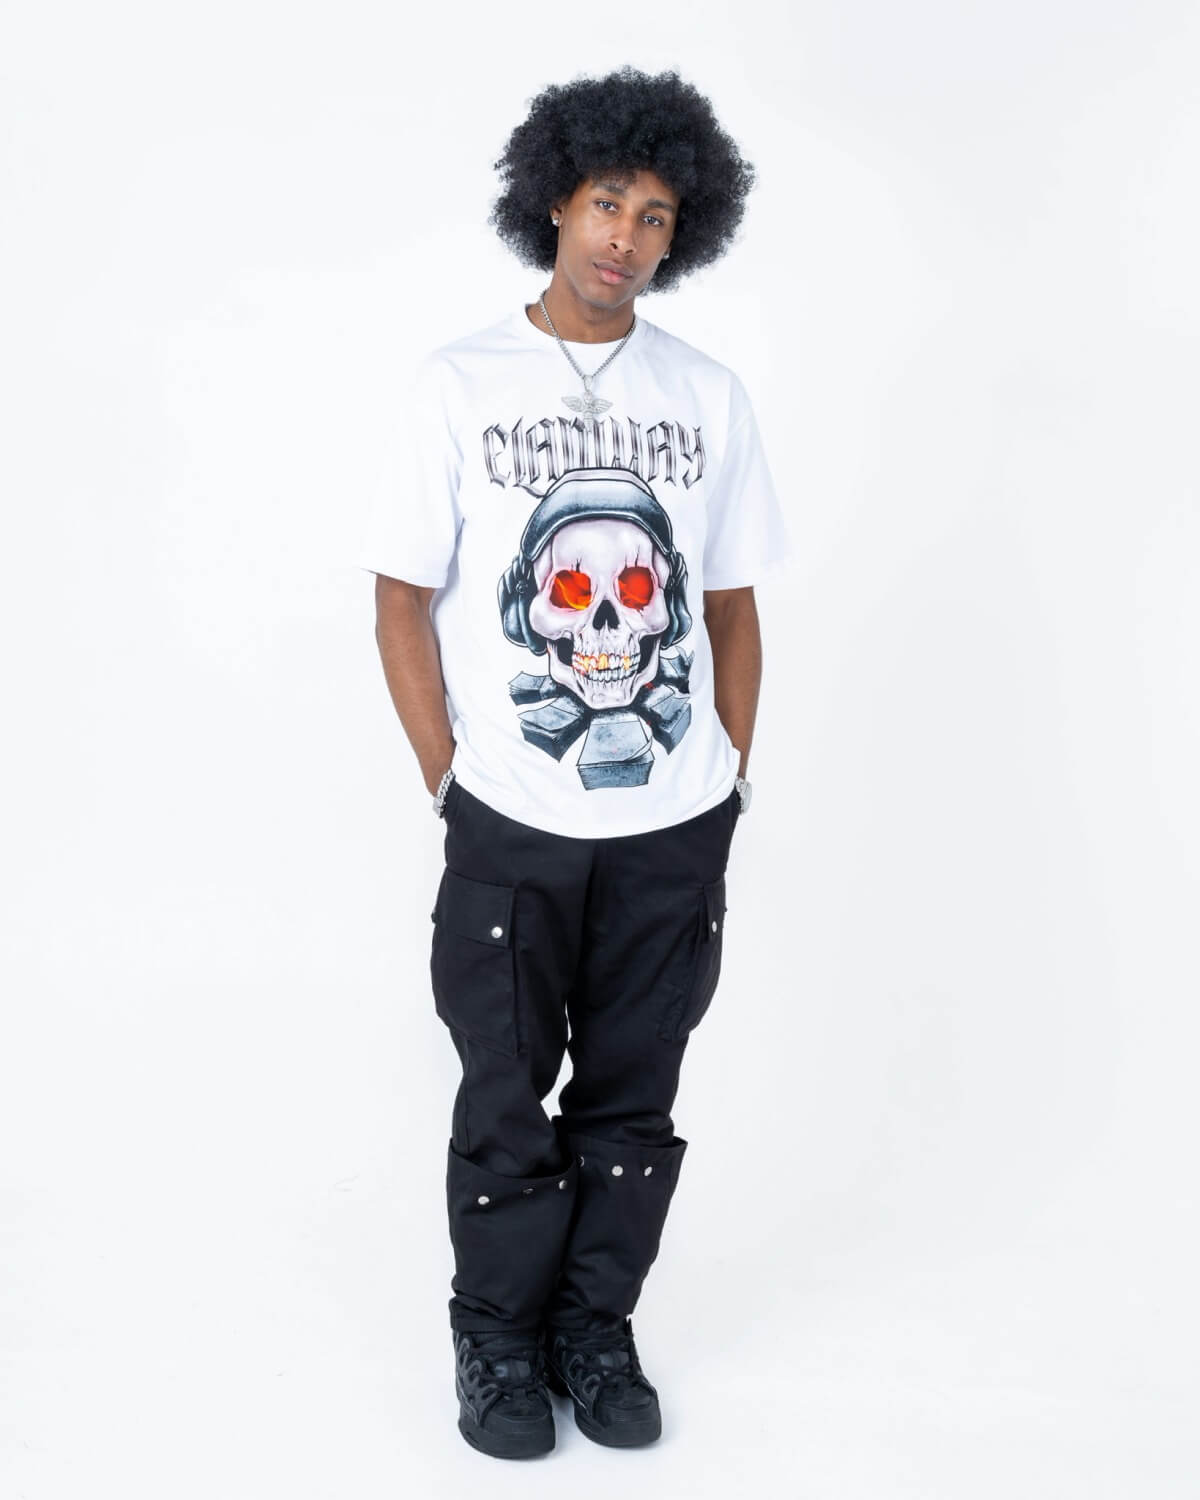 Elanway - Oversized T-Shirt With Skull Print